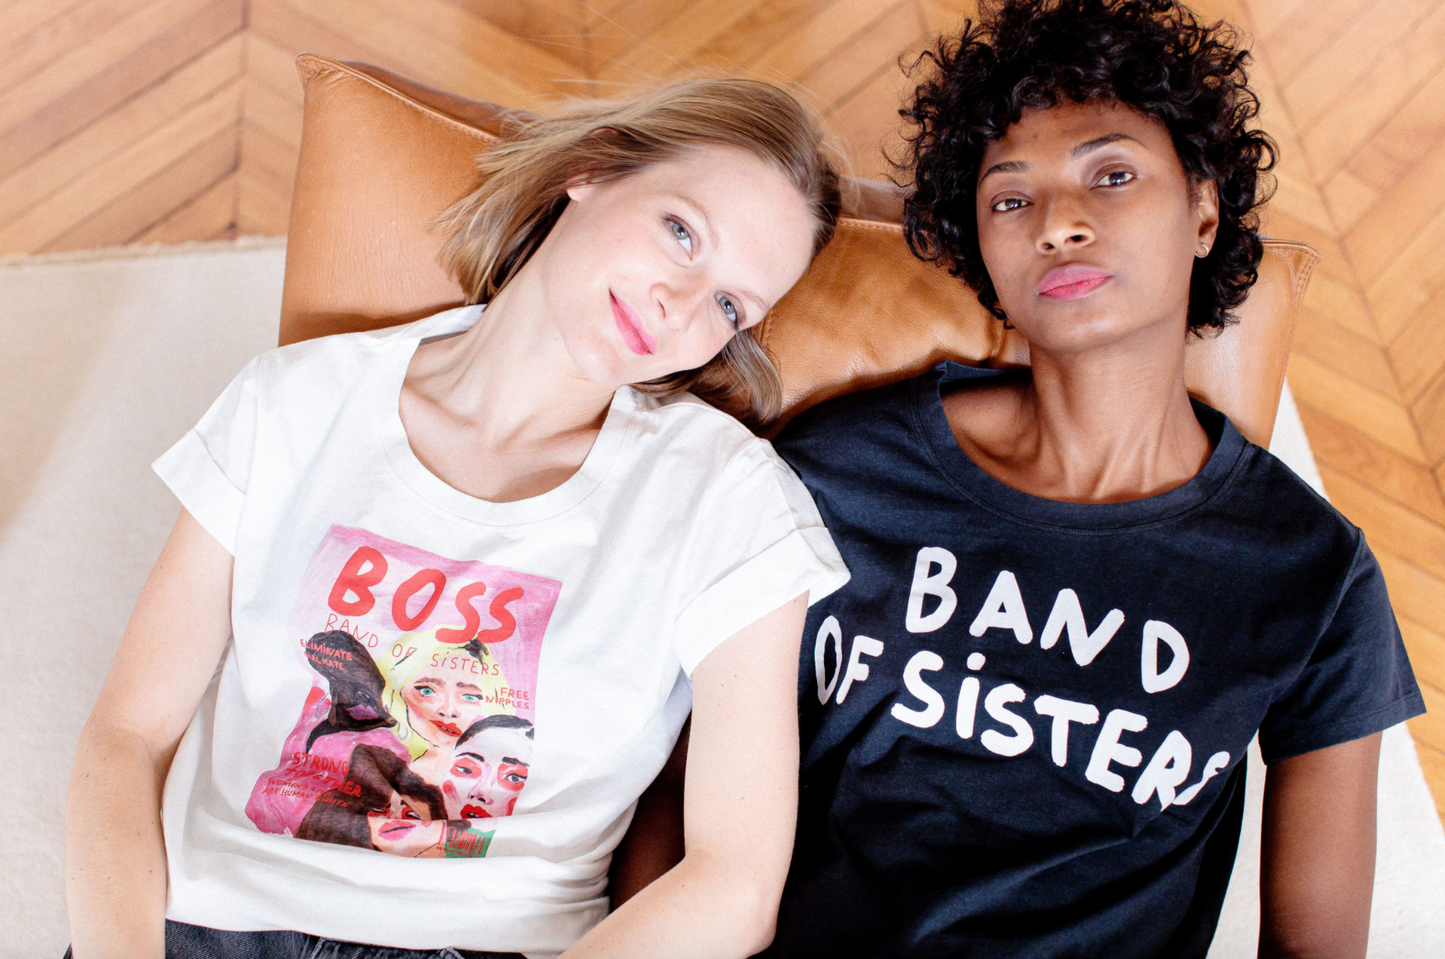 Band of Sisters COVER tee shirt X Patine X Natacha Paschal